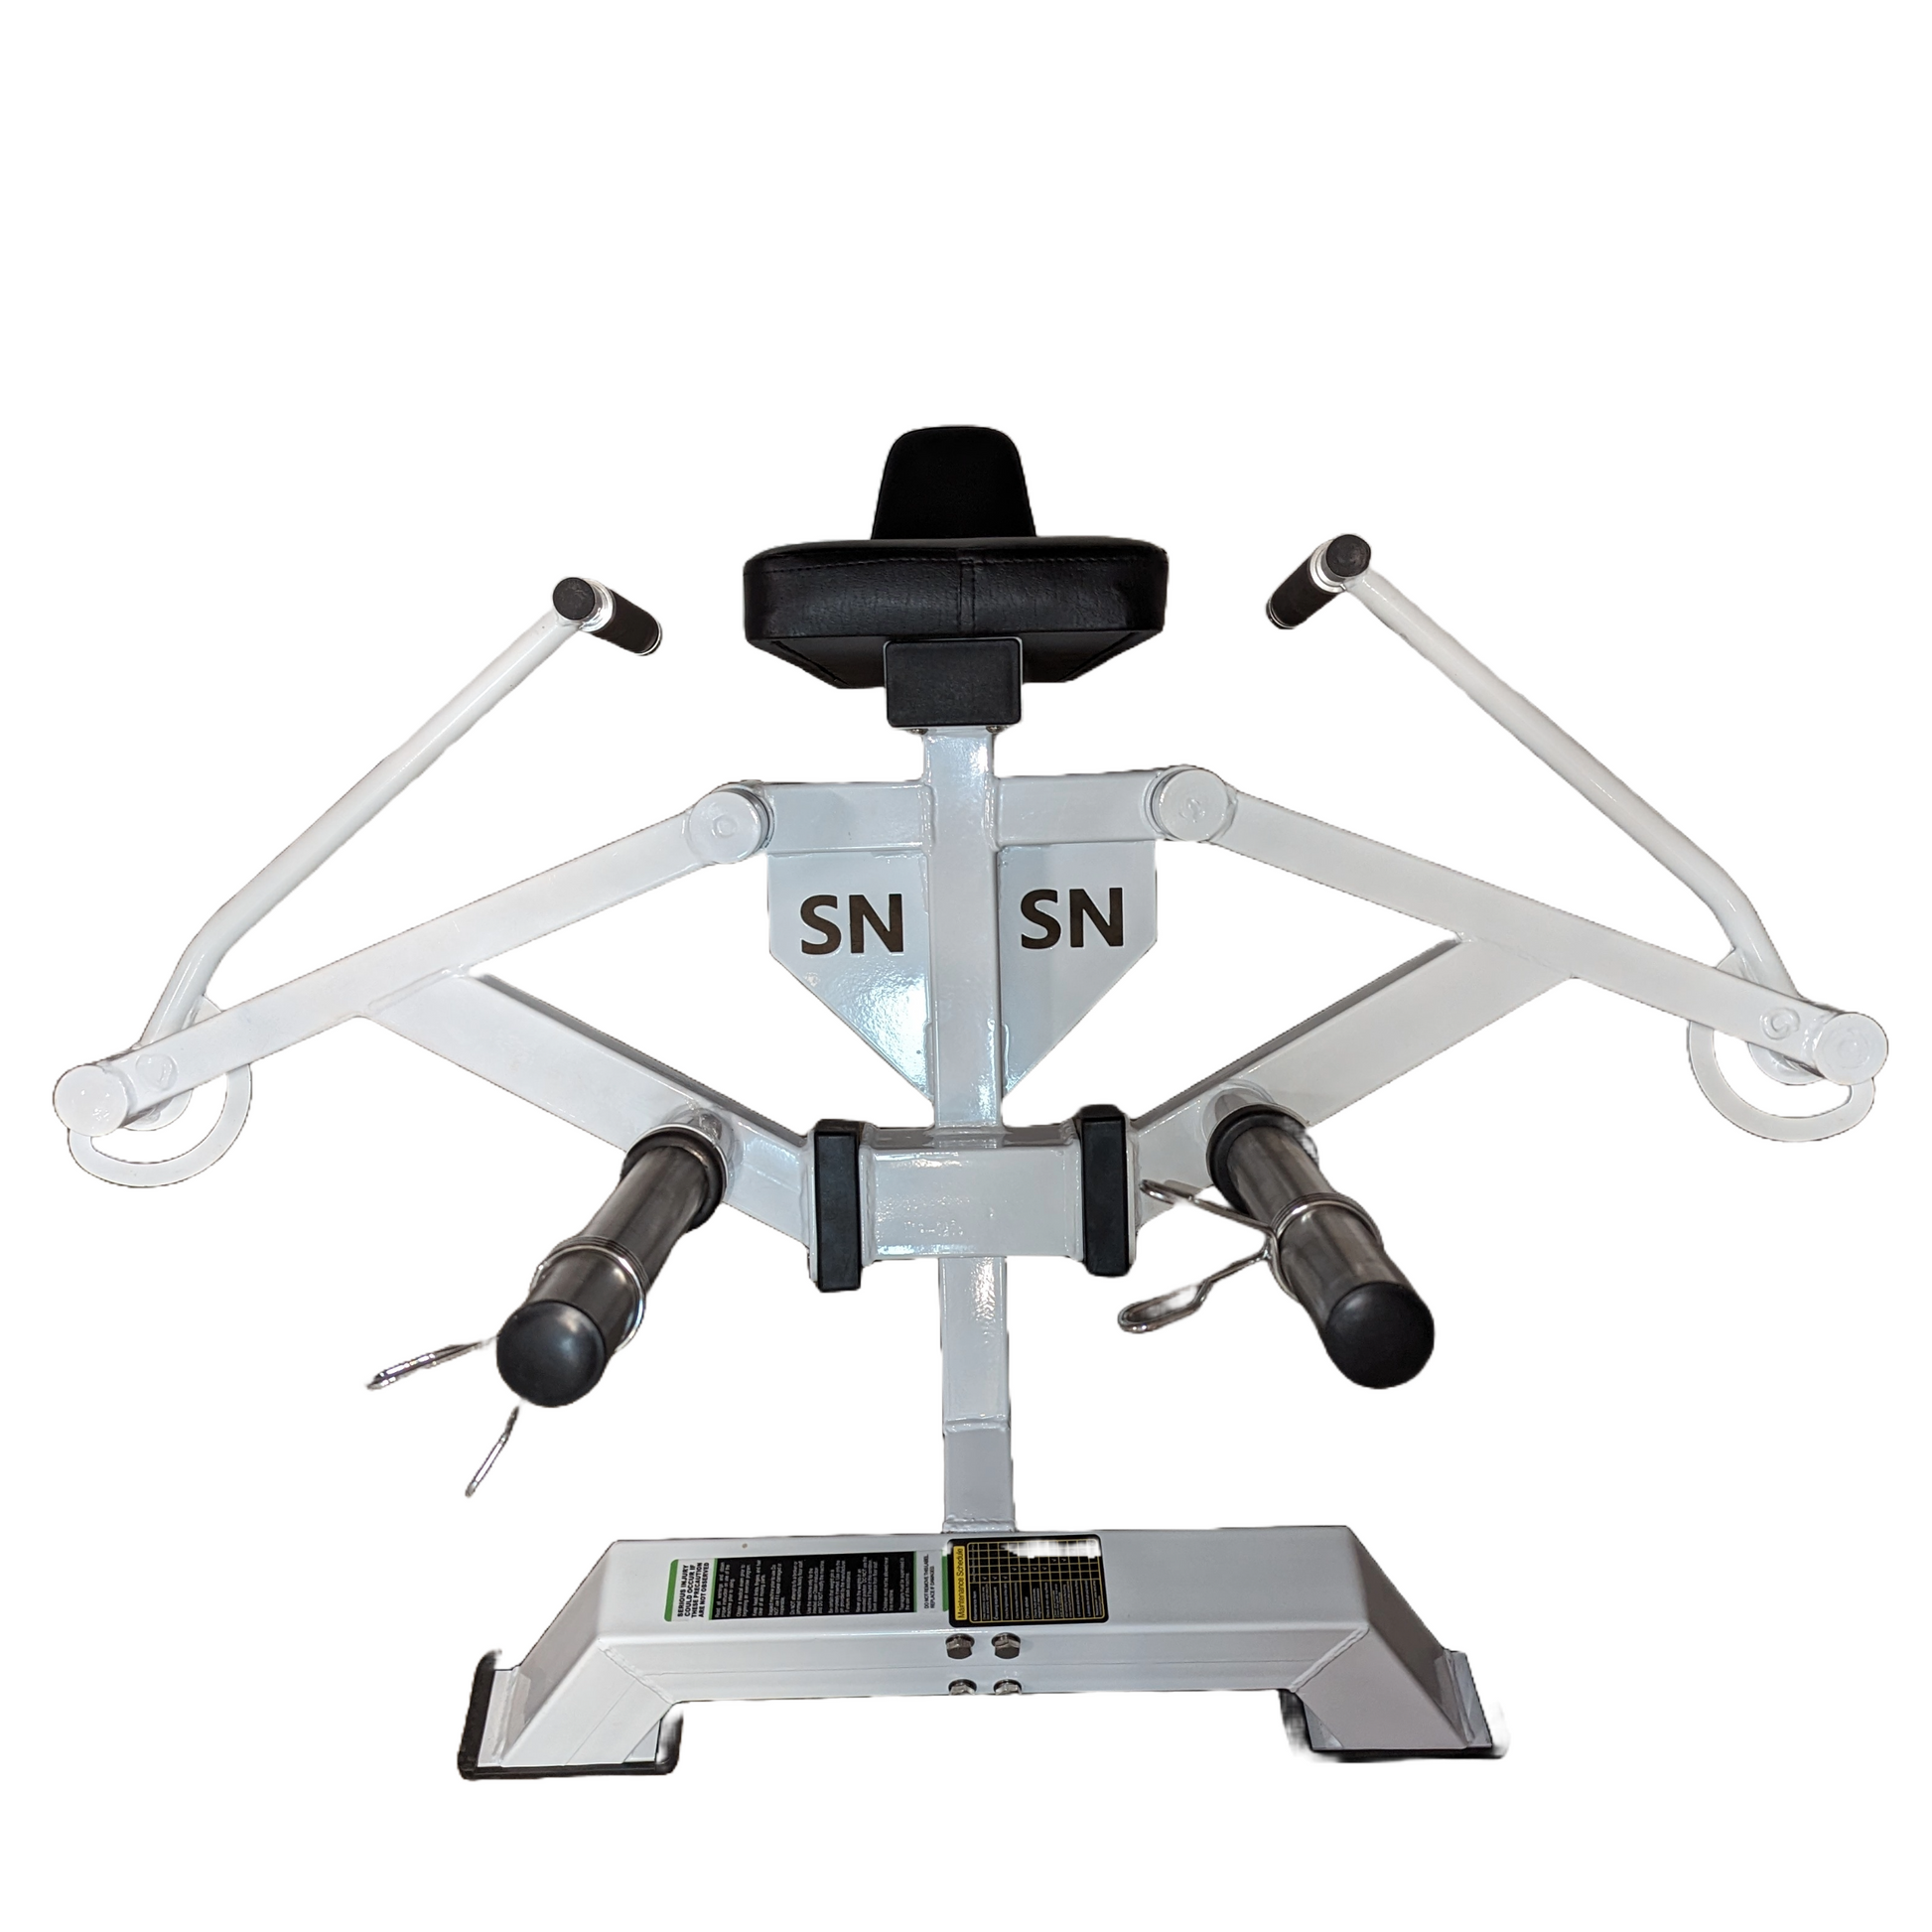 Incline Pec Fly FW - Fittest Equipment